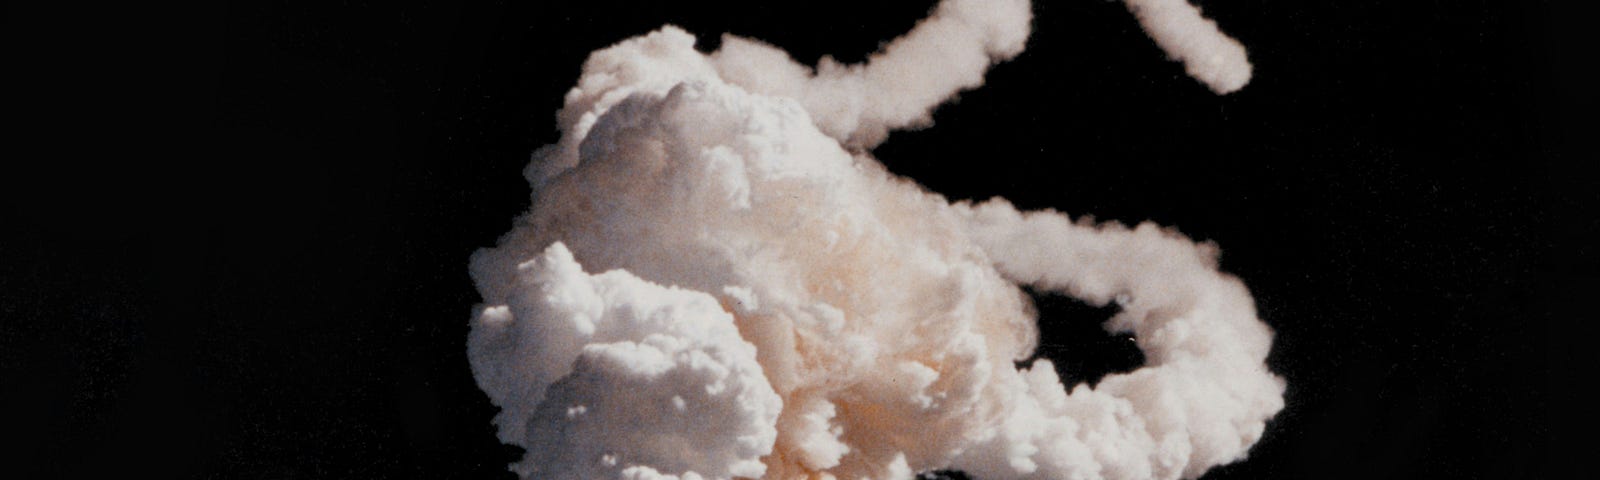 Space Shuttle Challenger explodes, leaving thick white contrails. The explosion was the first fatal disaster involving an American spacecraft in flight.